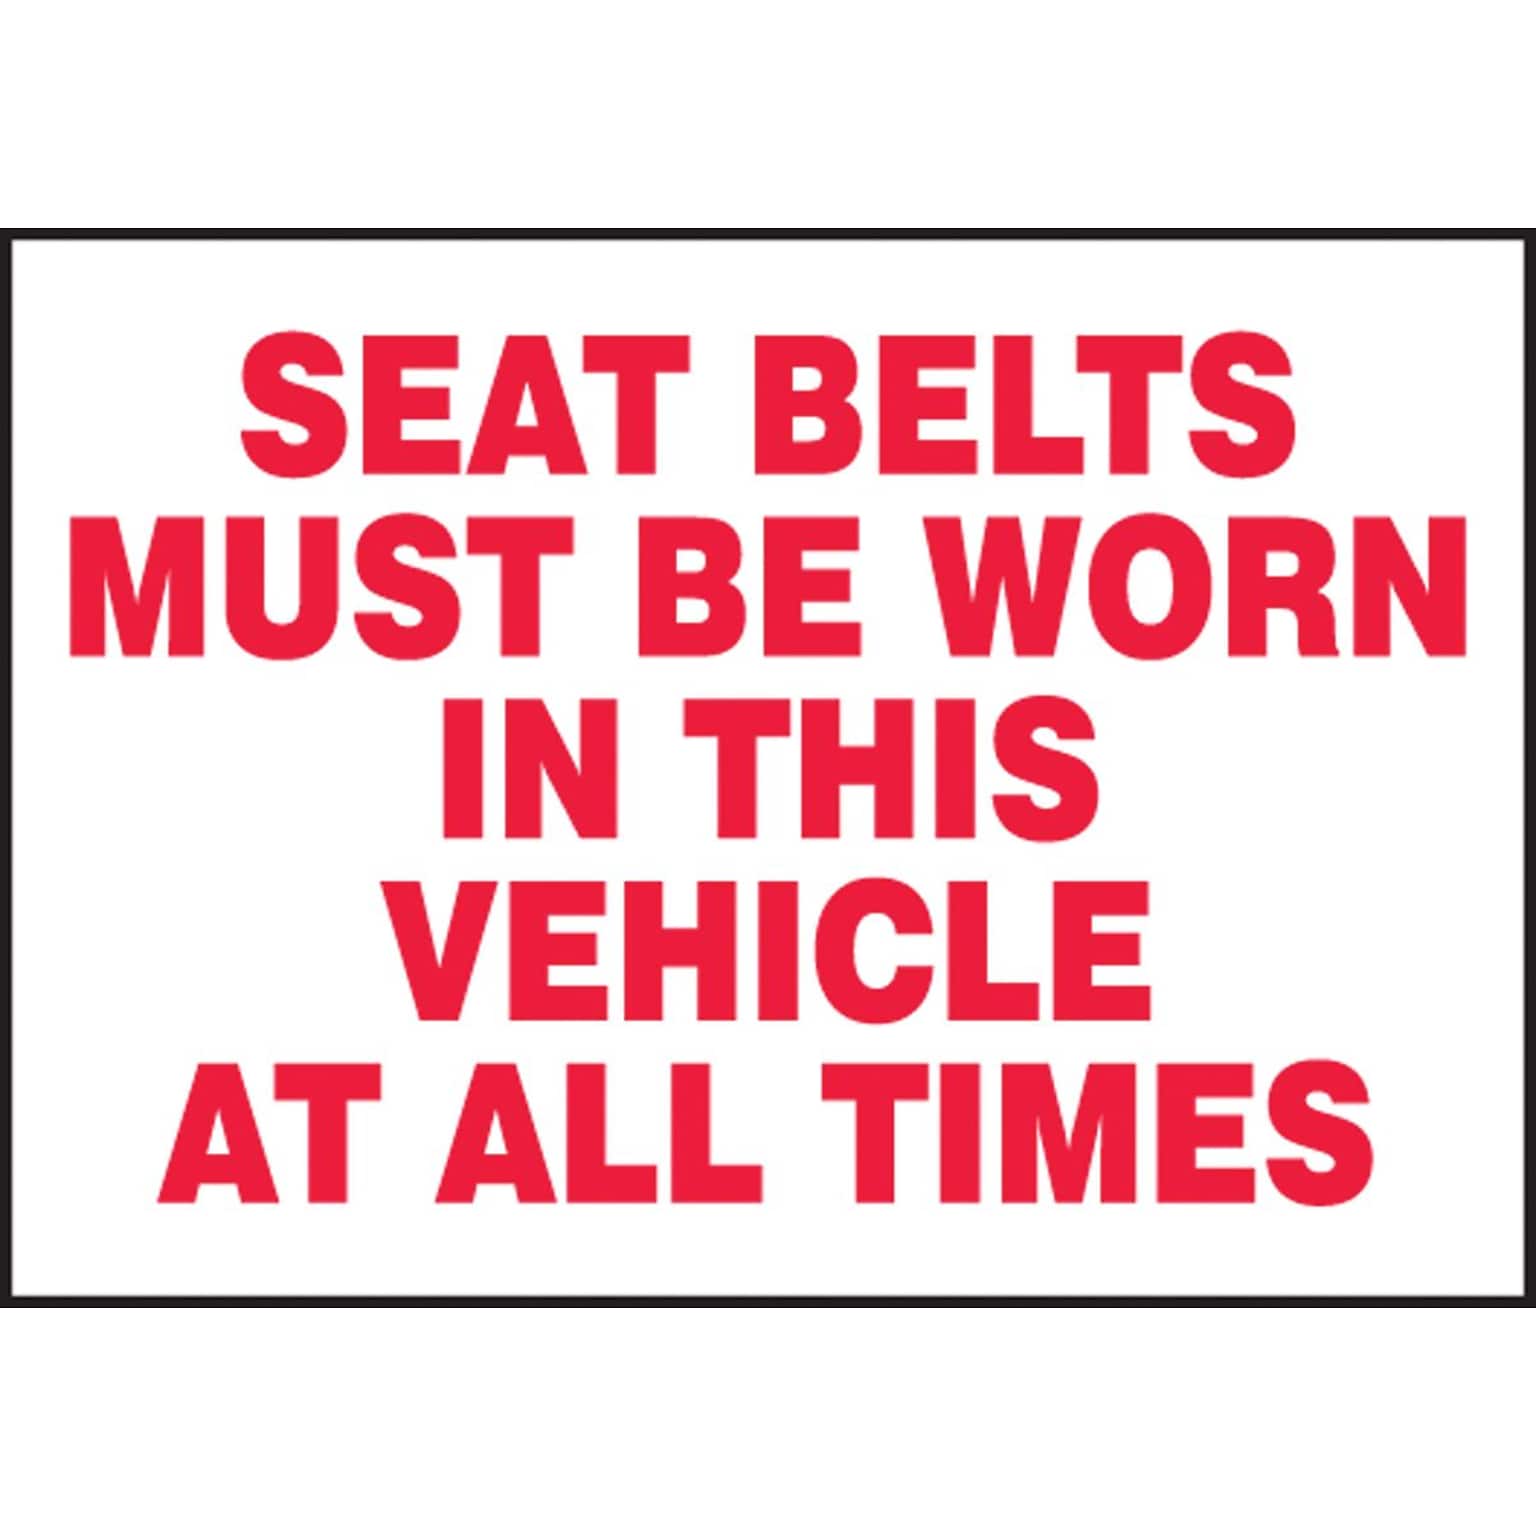 Accuform Label, SEAT BELT MUST BE WORN IN THIS VEHICLE ALL TIMES, 3 1/2x5 Adhesive Vinyl, 5/Pack (LVHR516VSP)